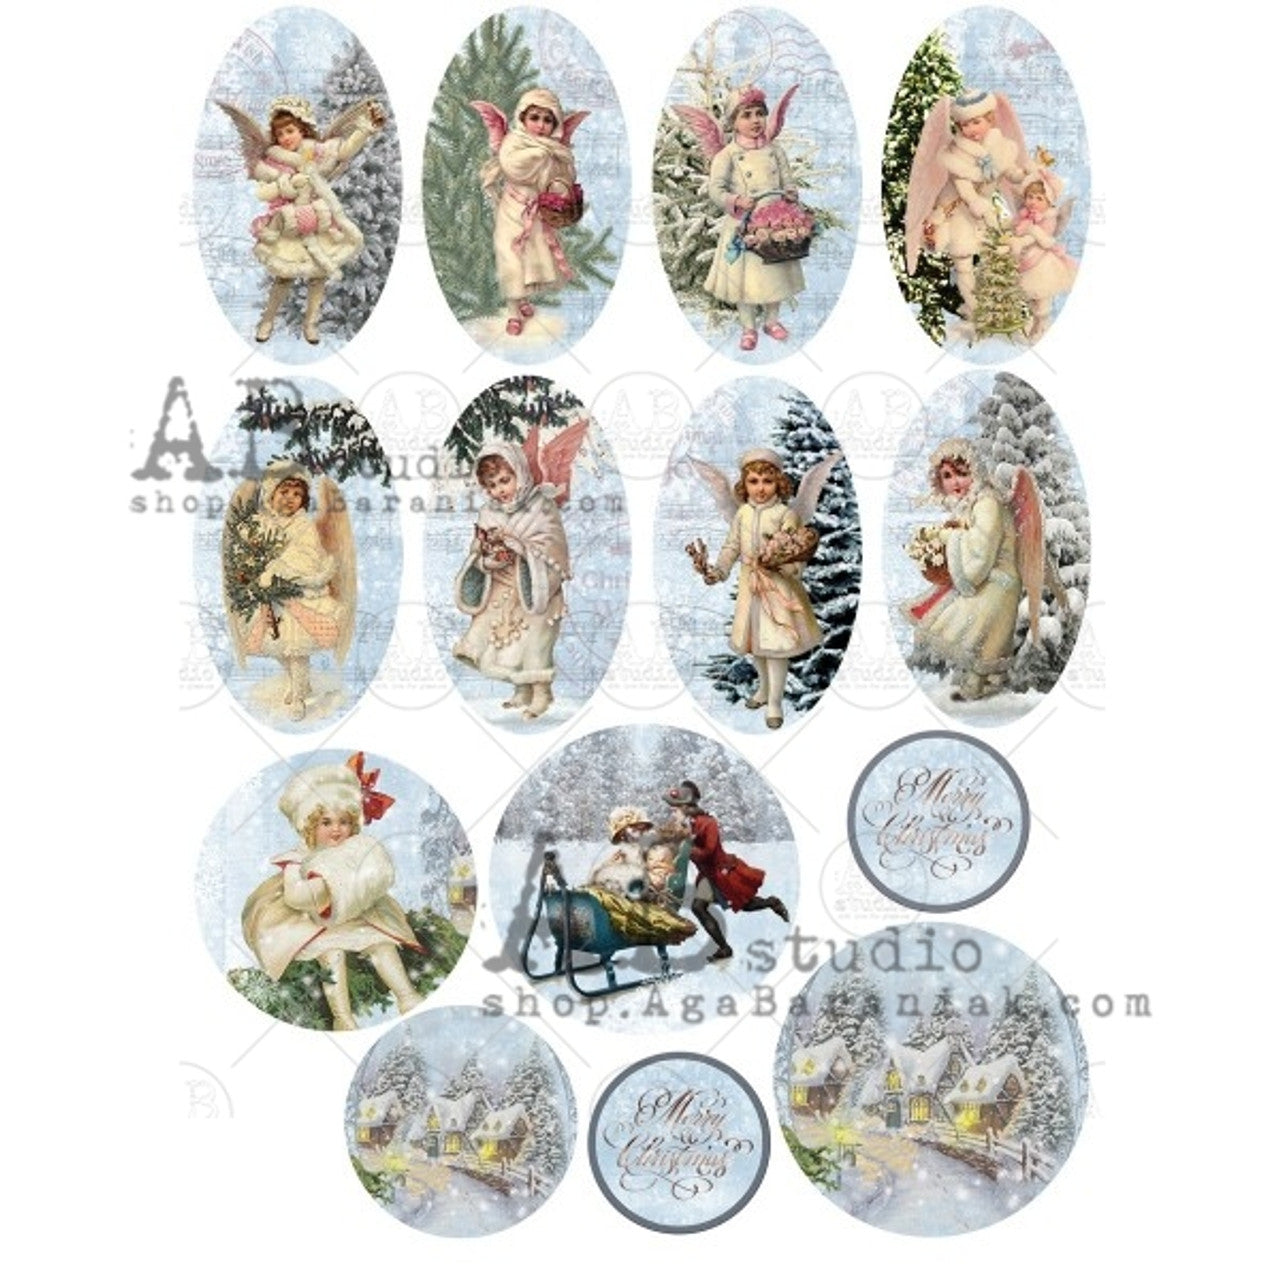 AB Studios Rice Paper  SHABBY WINTER ANGELS OVAL   A4  0453